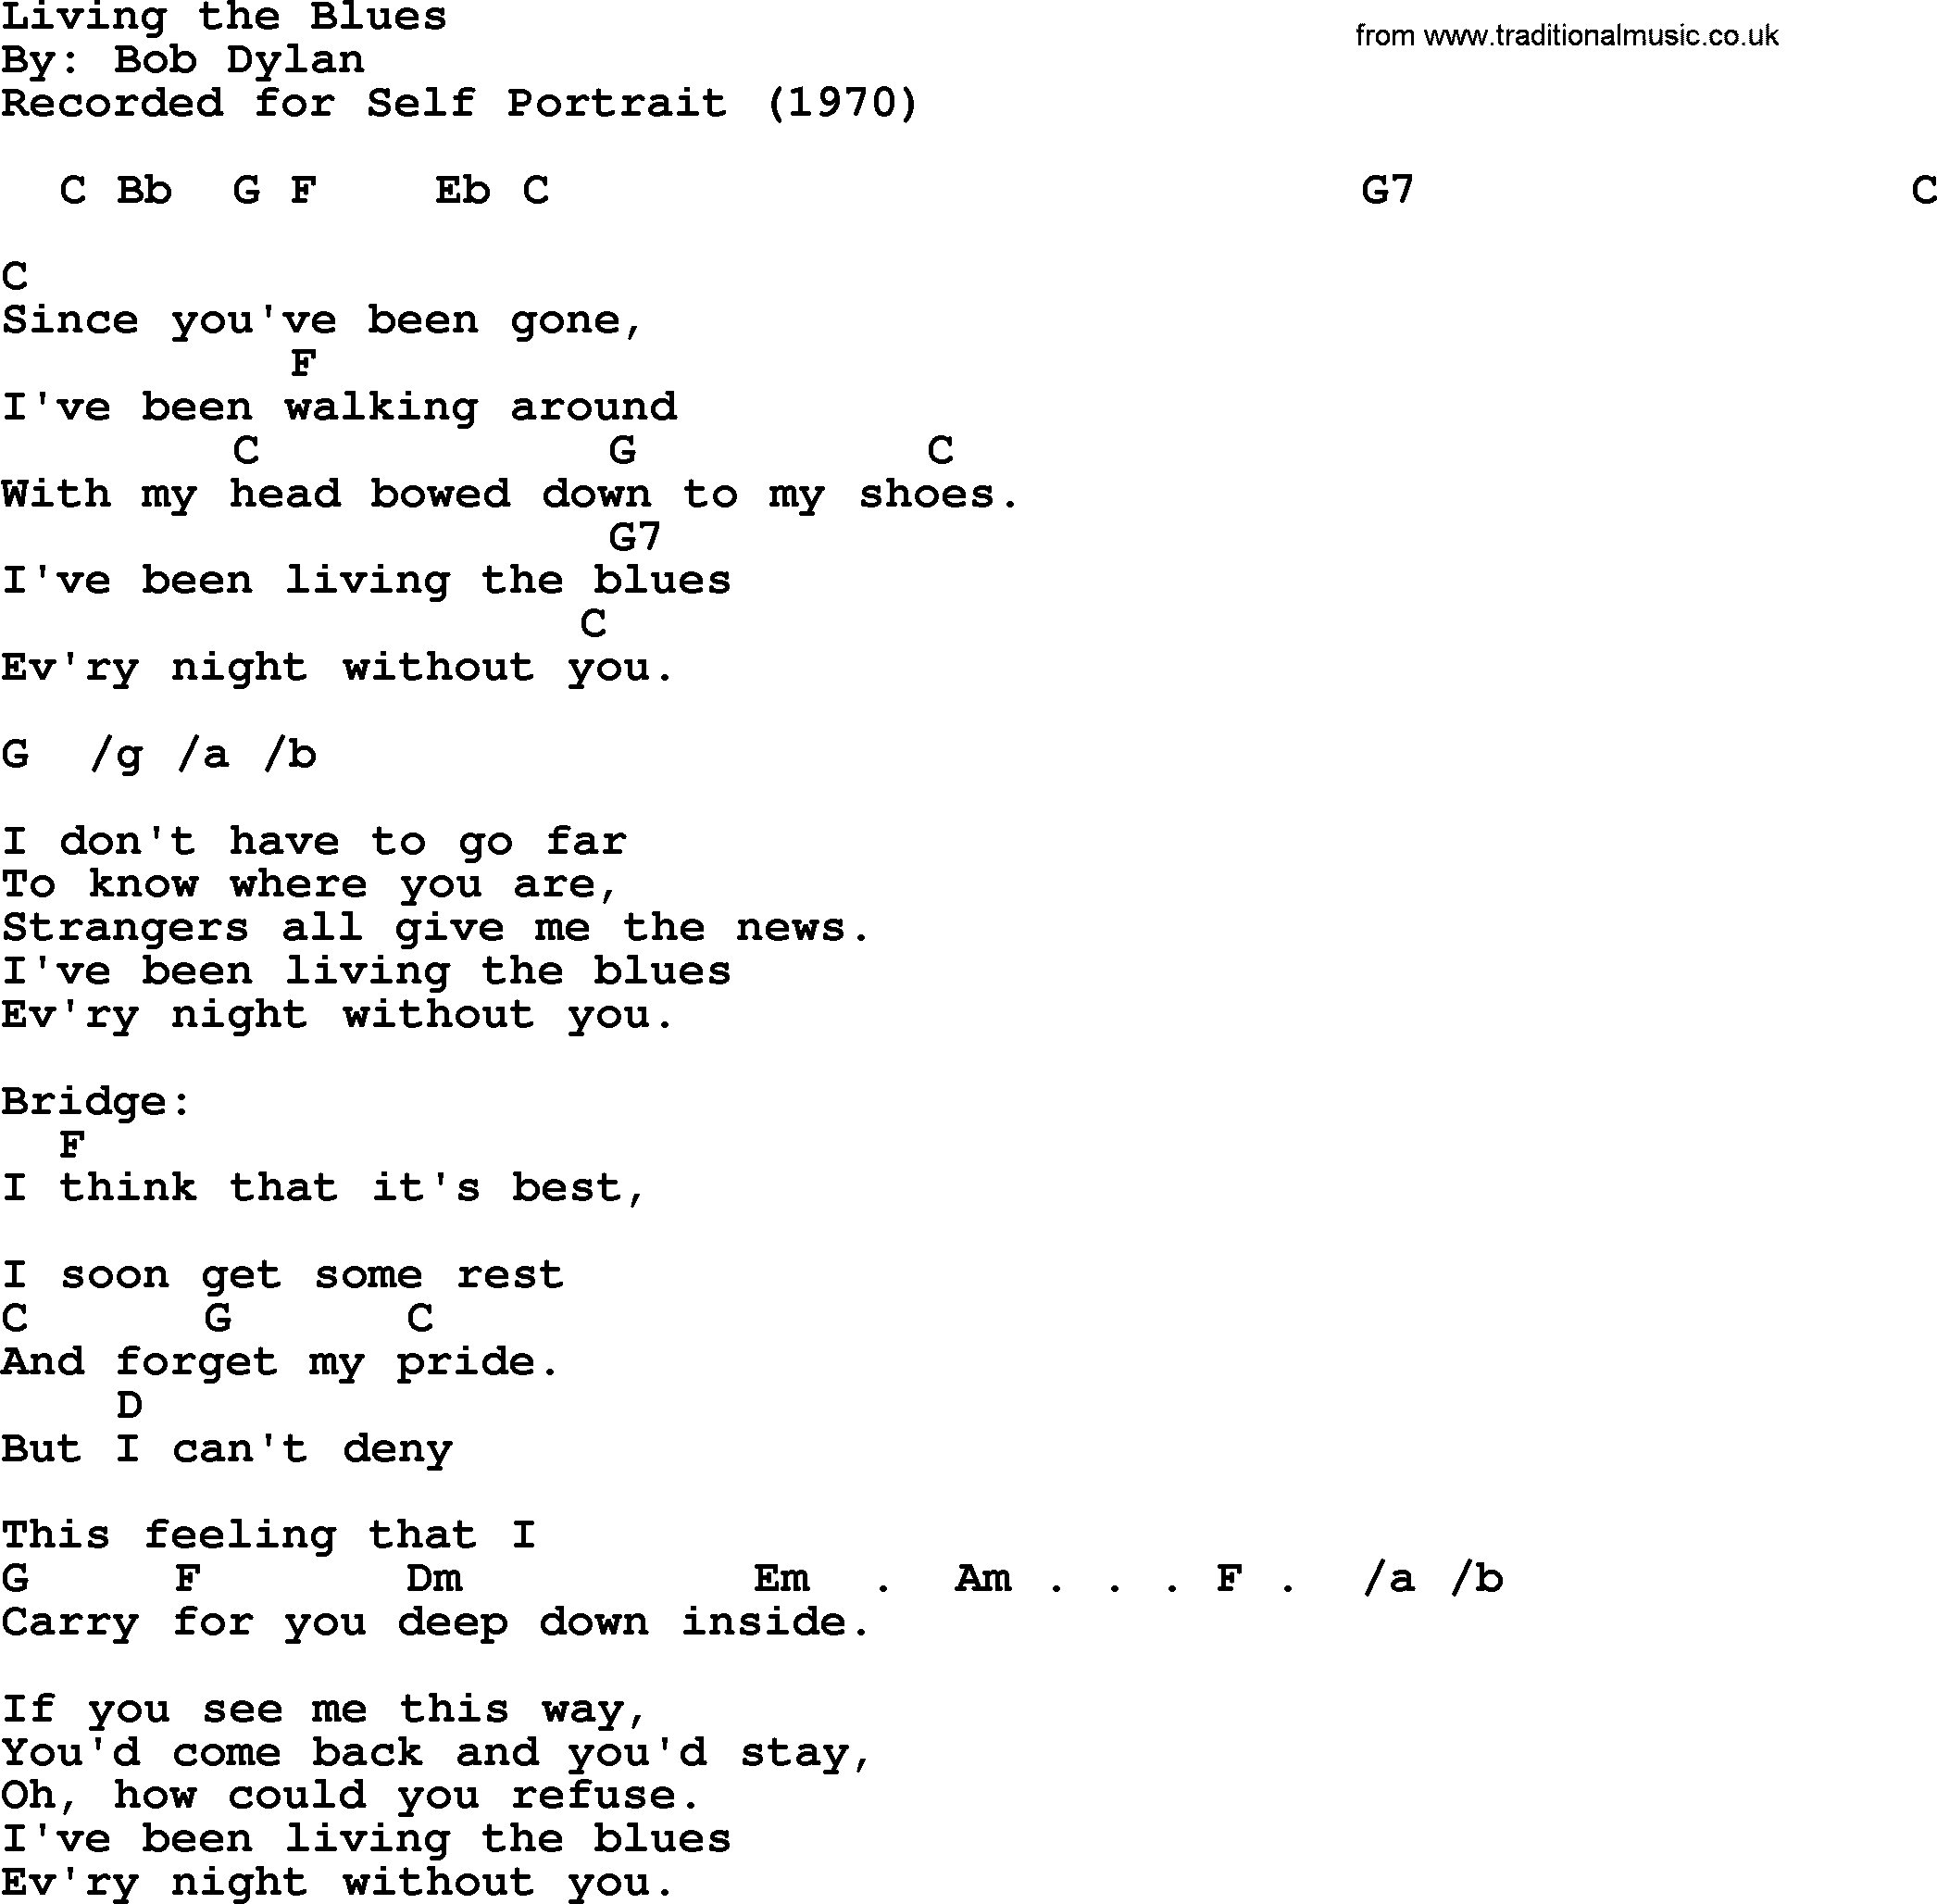 Bob Dylan song, lyrics with chords - Living the Blues